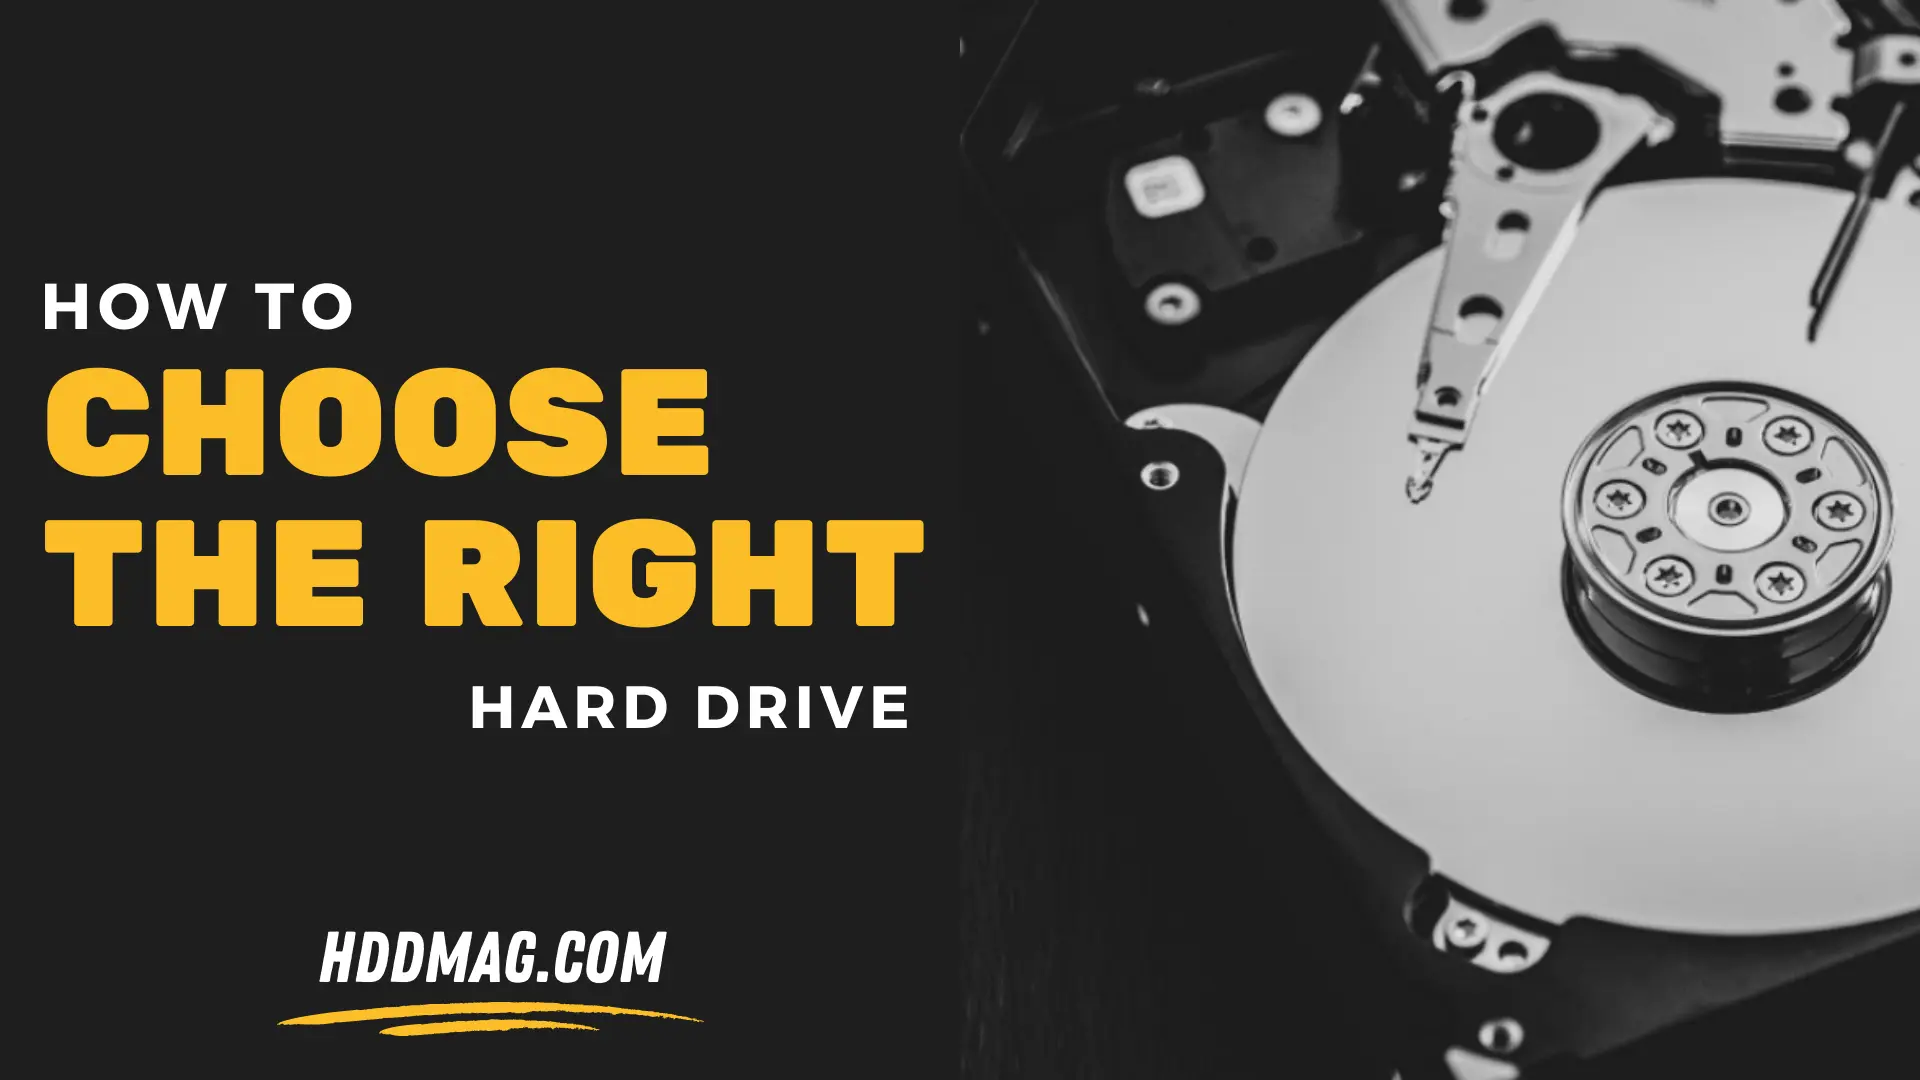 How To Choose the Right Hard Drive